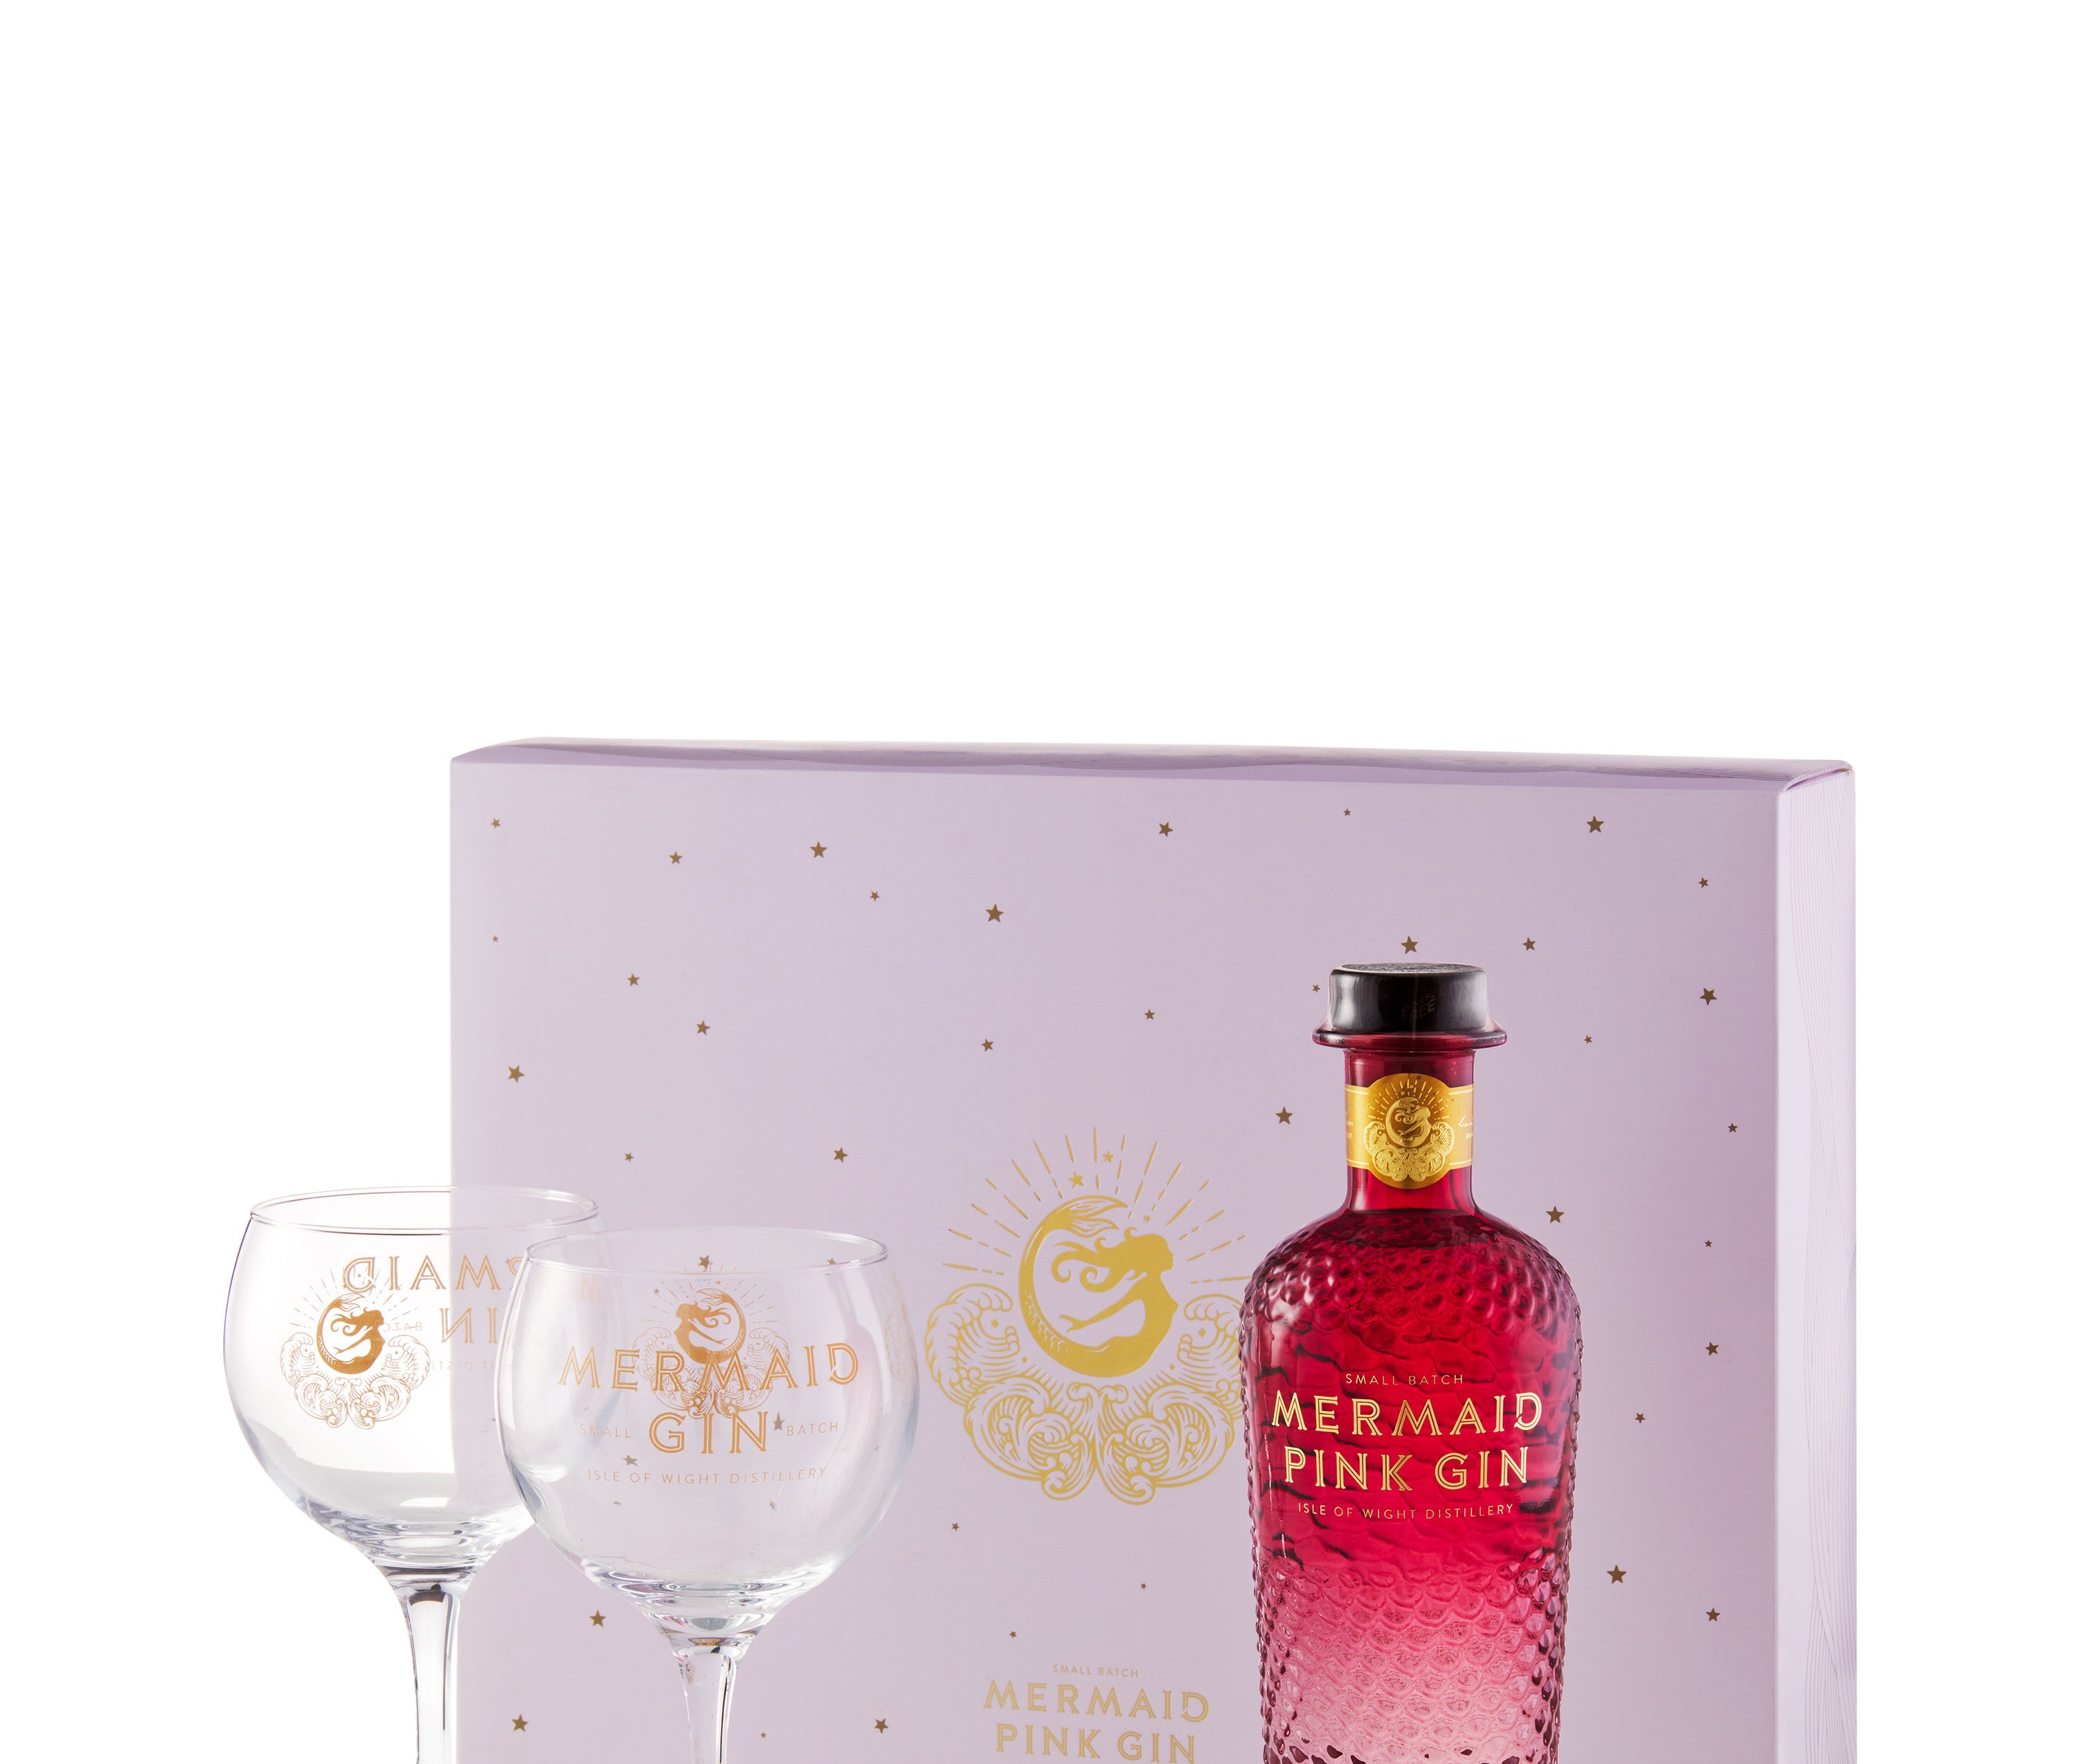 The pink gin next to two large stemmed glasses